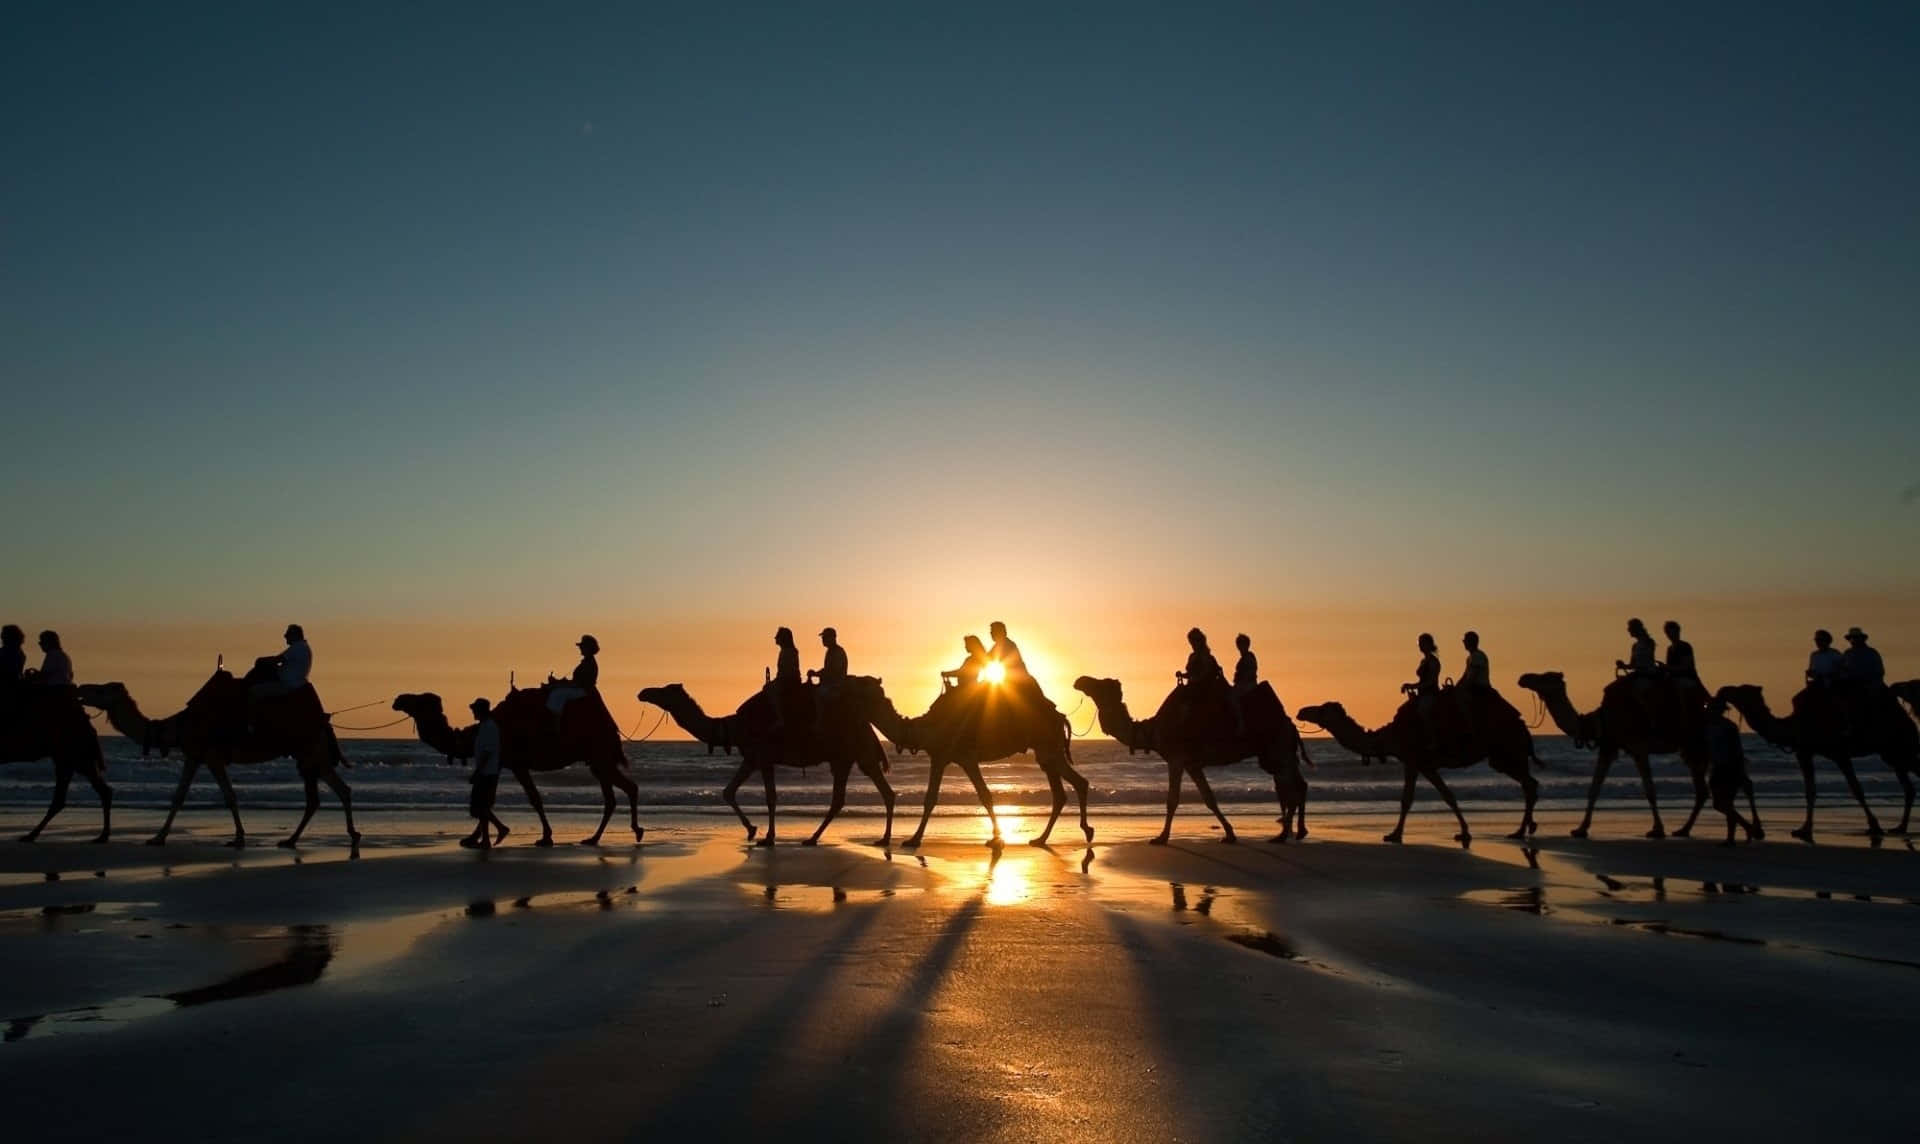 "One in a million - enjoy the serenity of a camel in the desert."